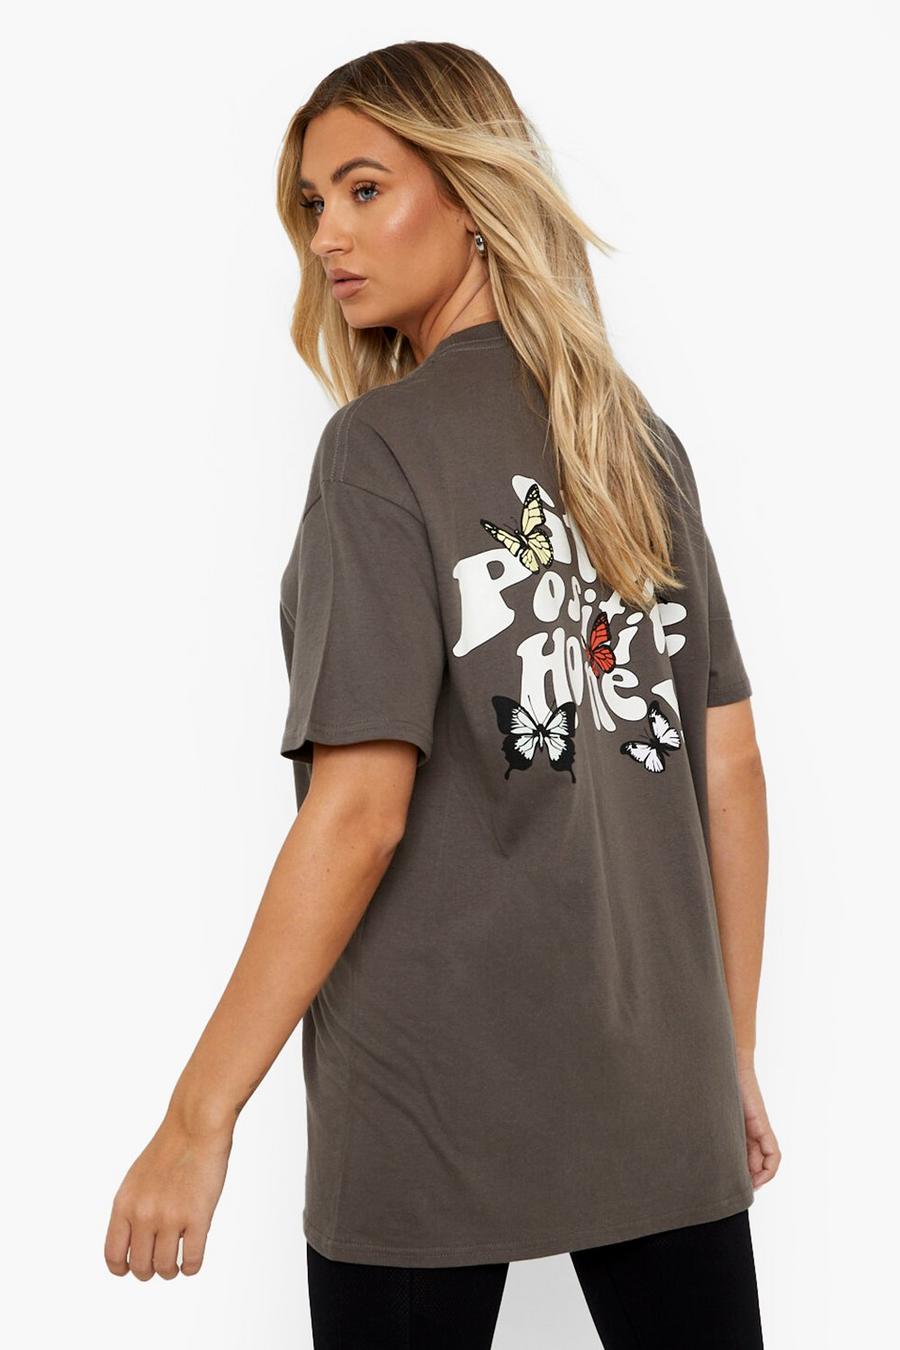 Charcoal grey Oversized Stay Positive Back Graphic T-Shirt